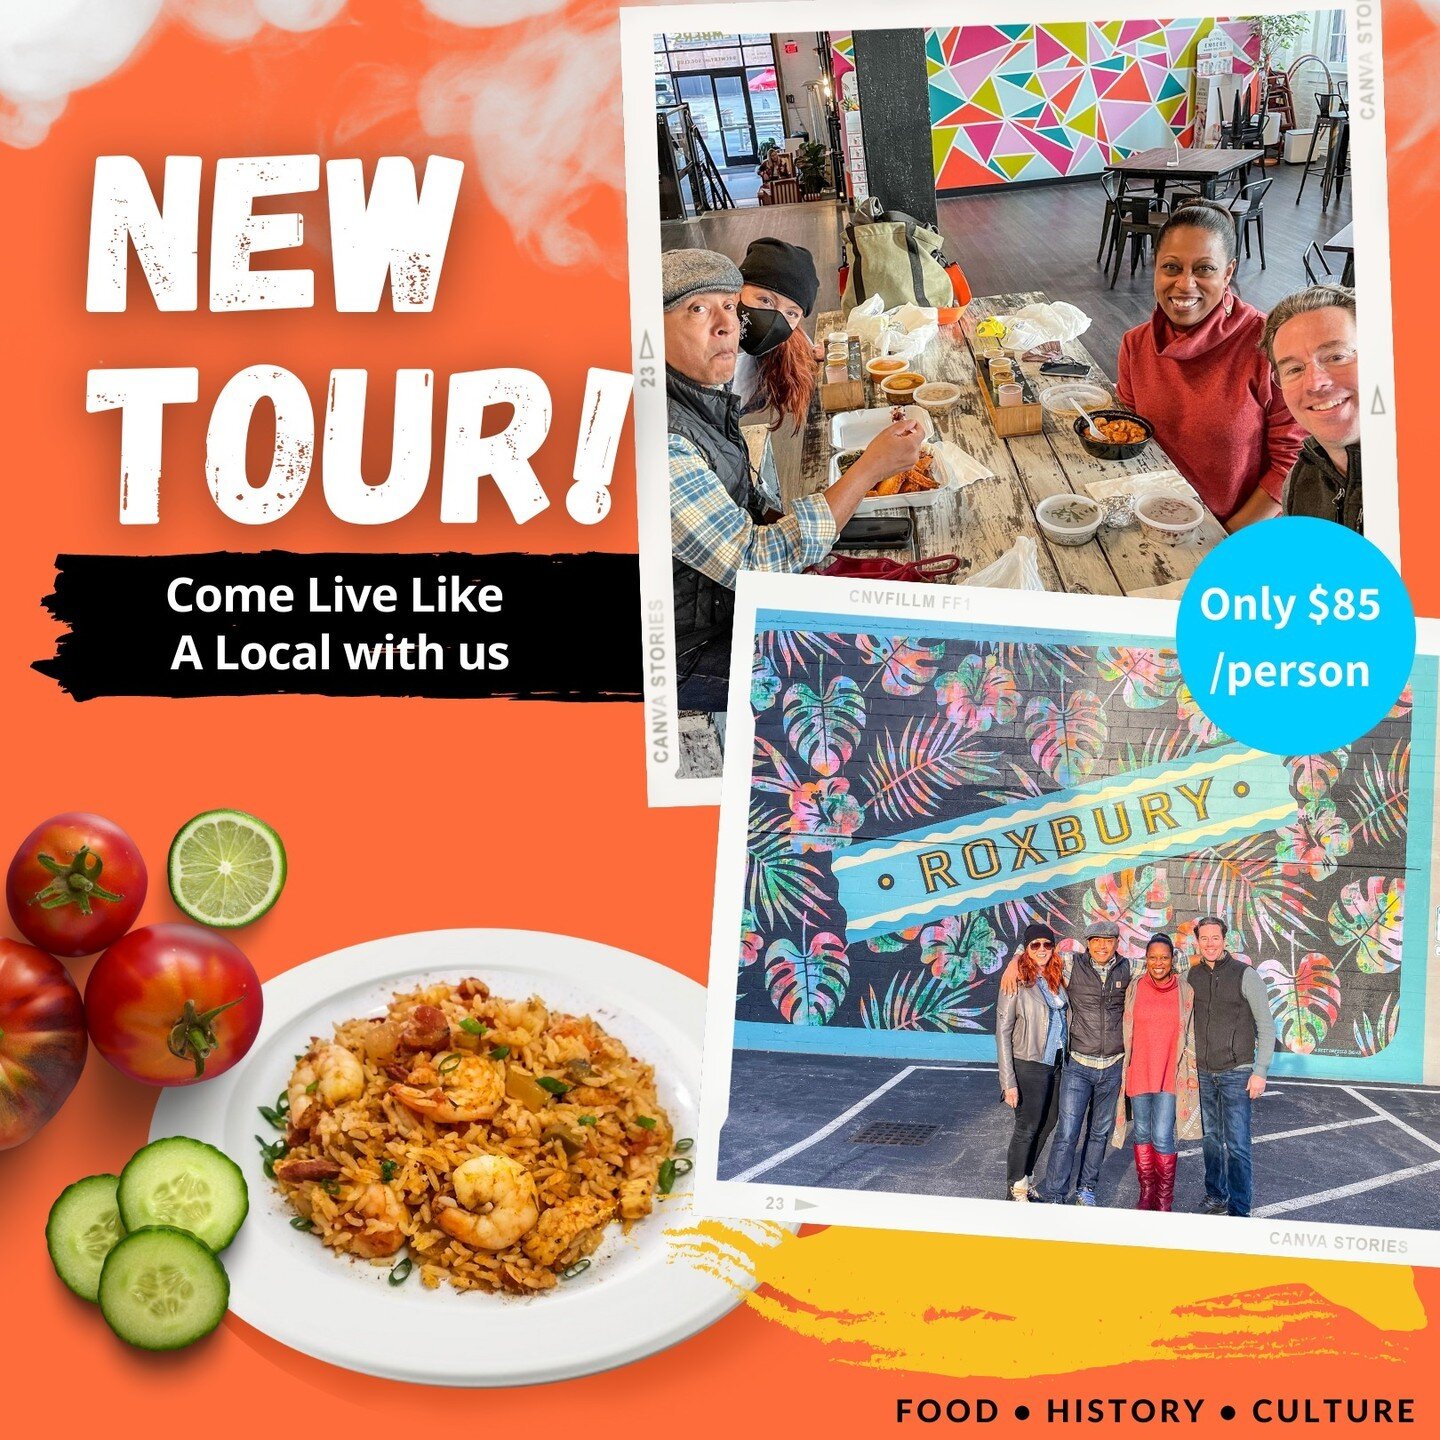 We are excited to introduce our new Roxbury Food &amp; Brew Tour! Take a walk through Nubian Square, grab a small plate from a local restaurant, and get a flight of beer, seltzer or Kombucha from a local brewery!⠀
⠀
Come Live Like A Local with us and